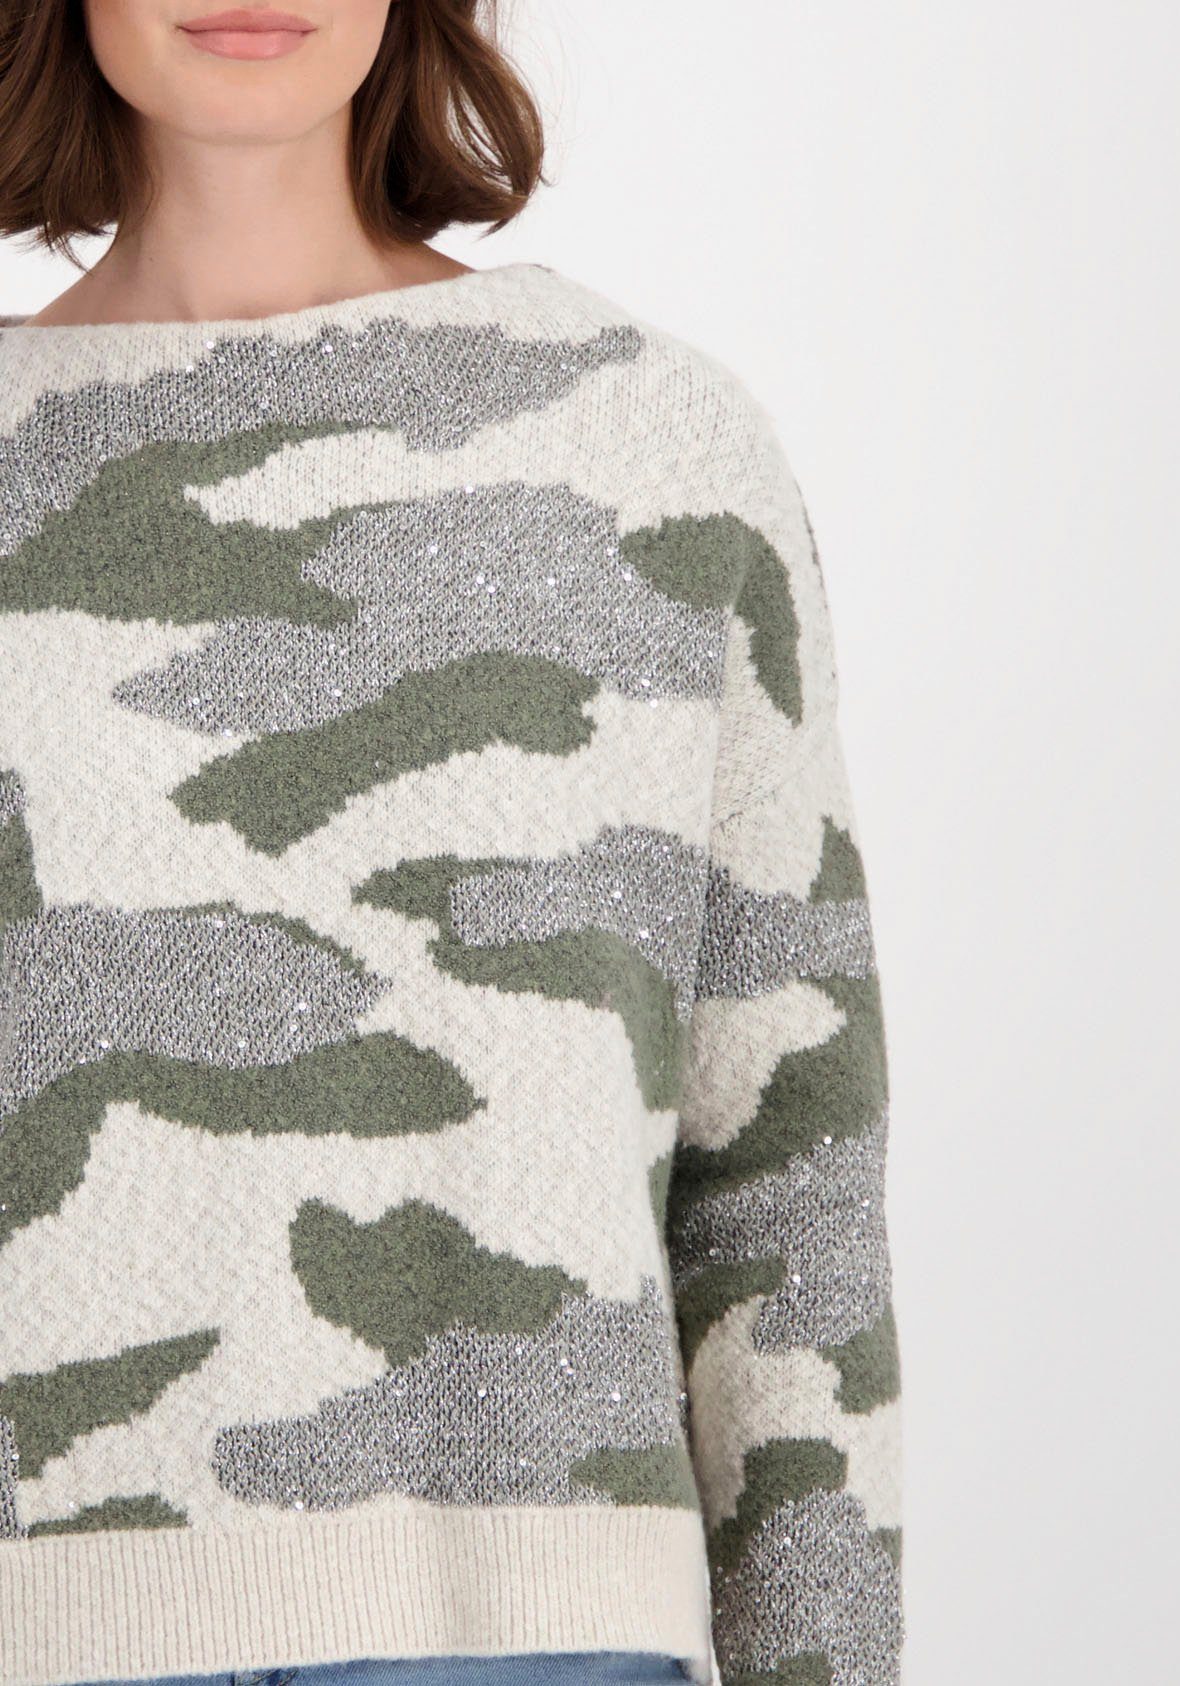 Camouflage in Pullover Camouflage Strickpullover Monari Muster